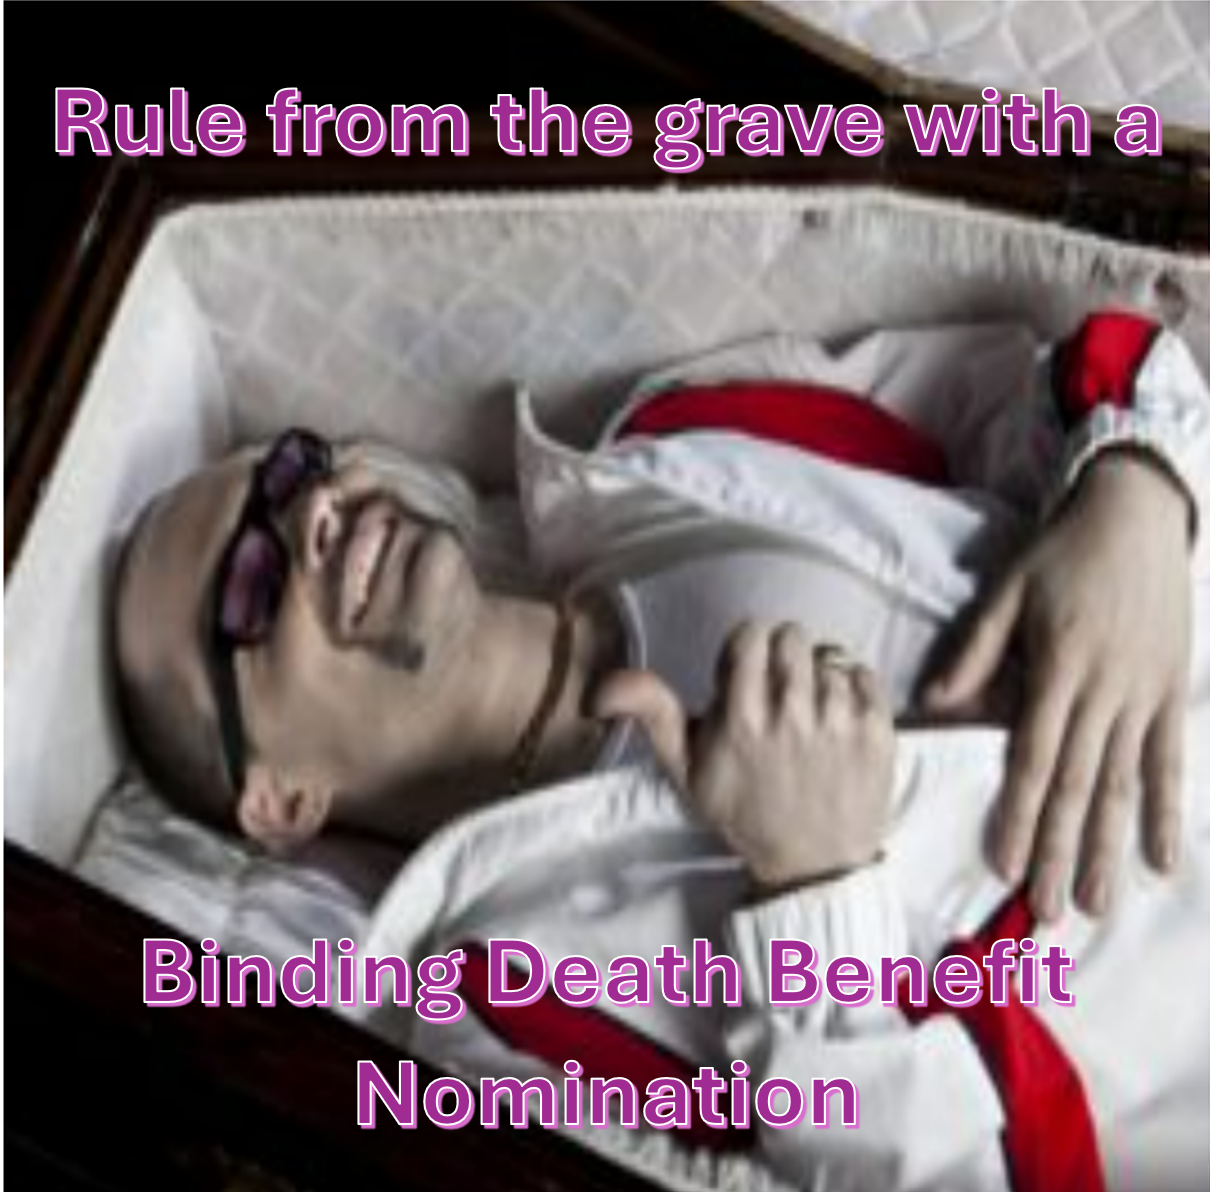 Binding death benefit nomination in your smsf rule from the grave